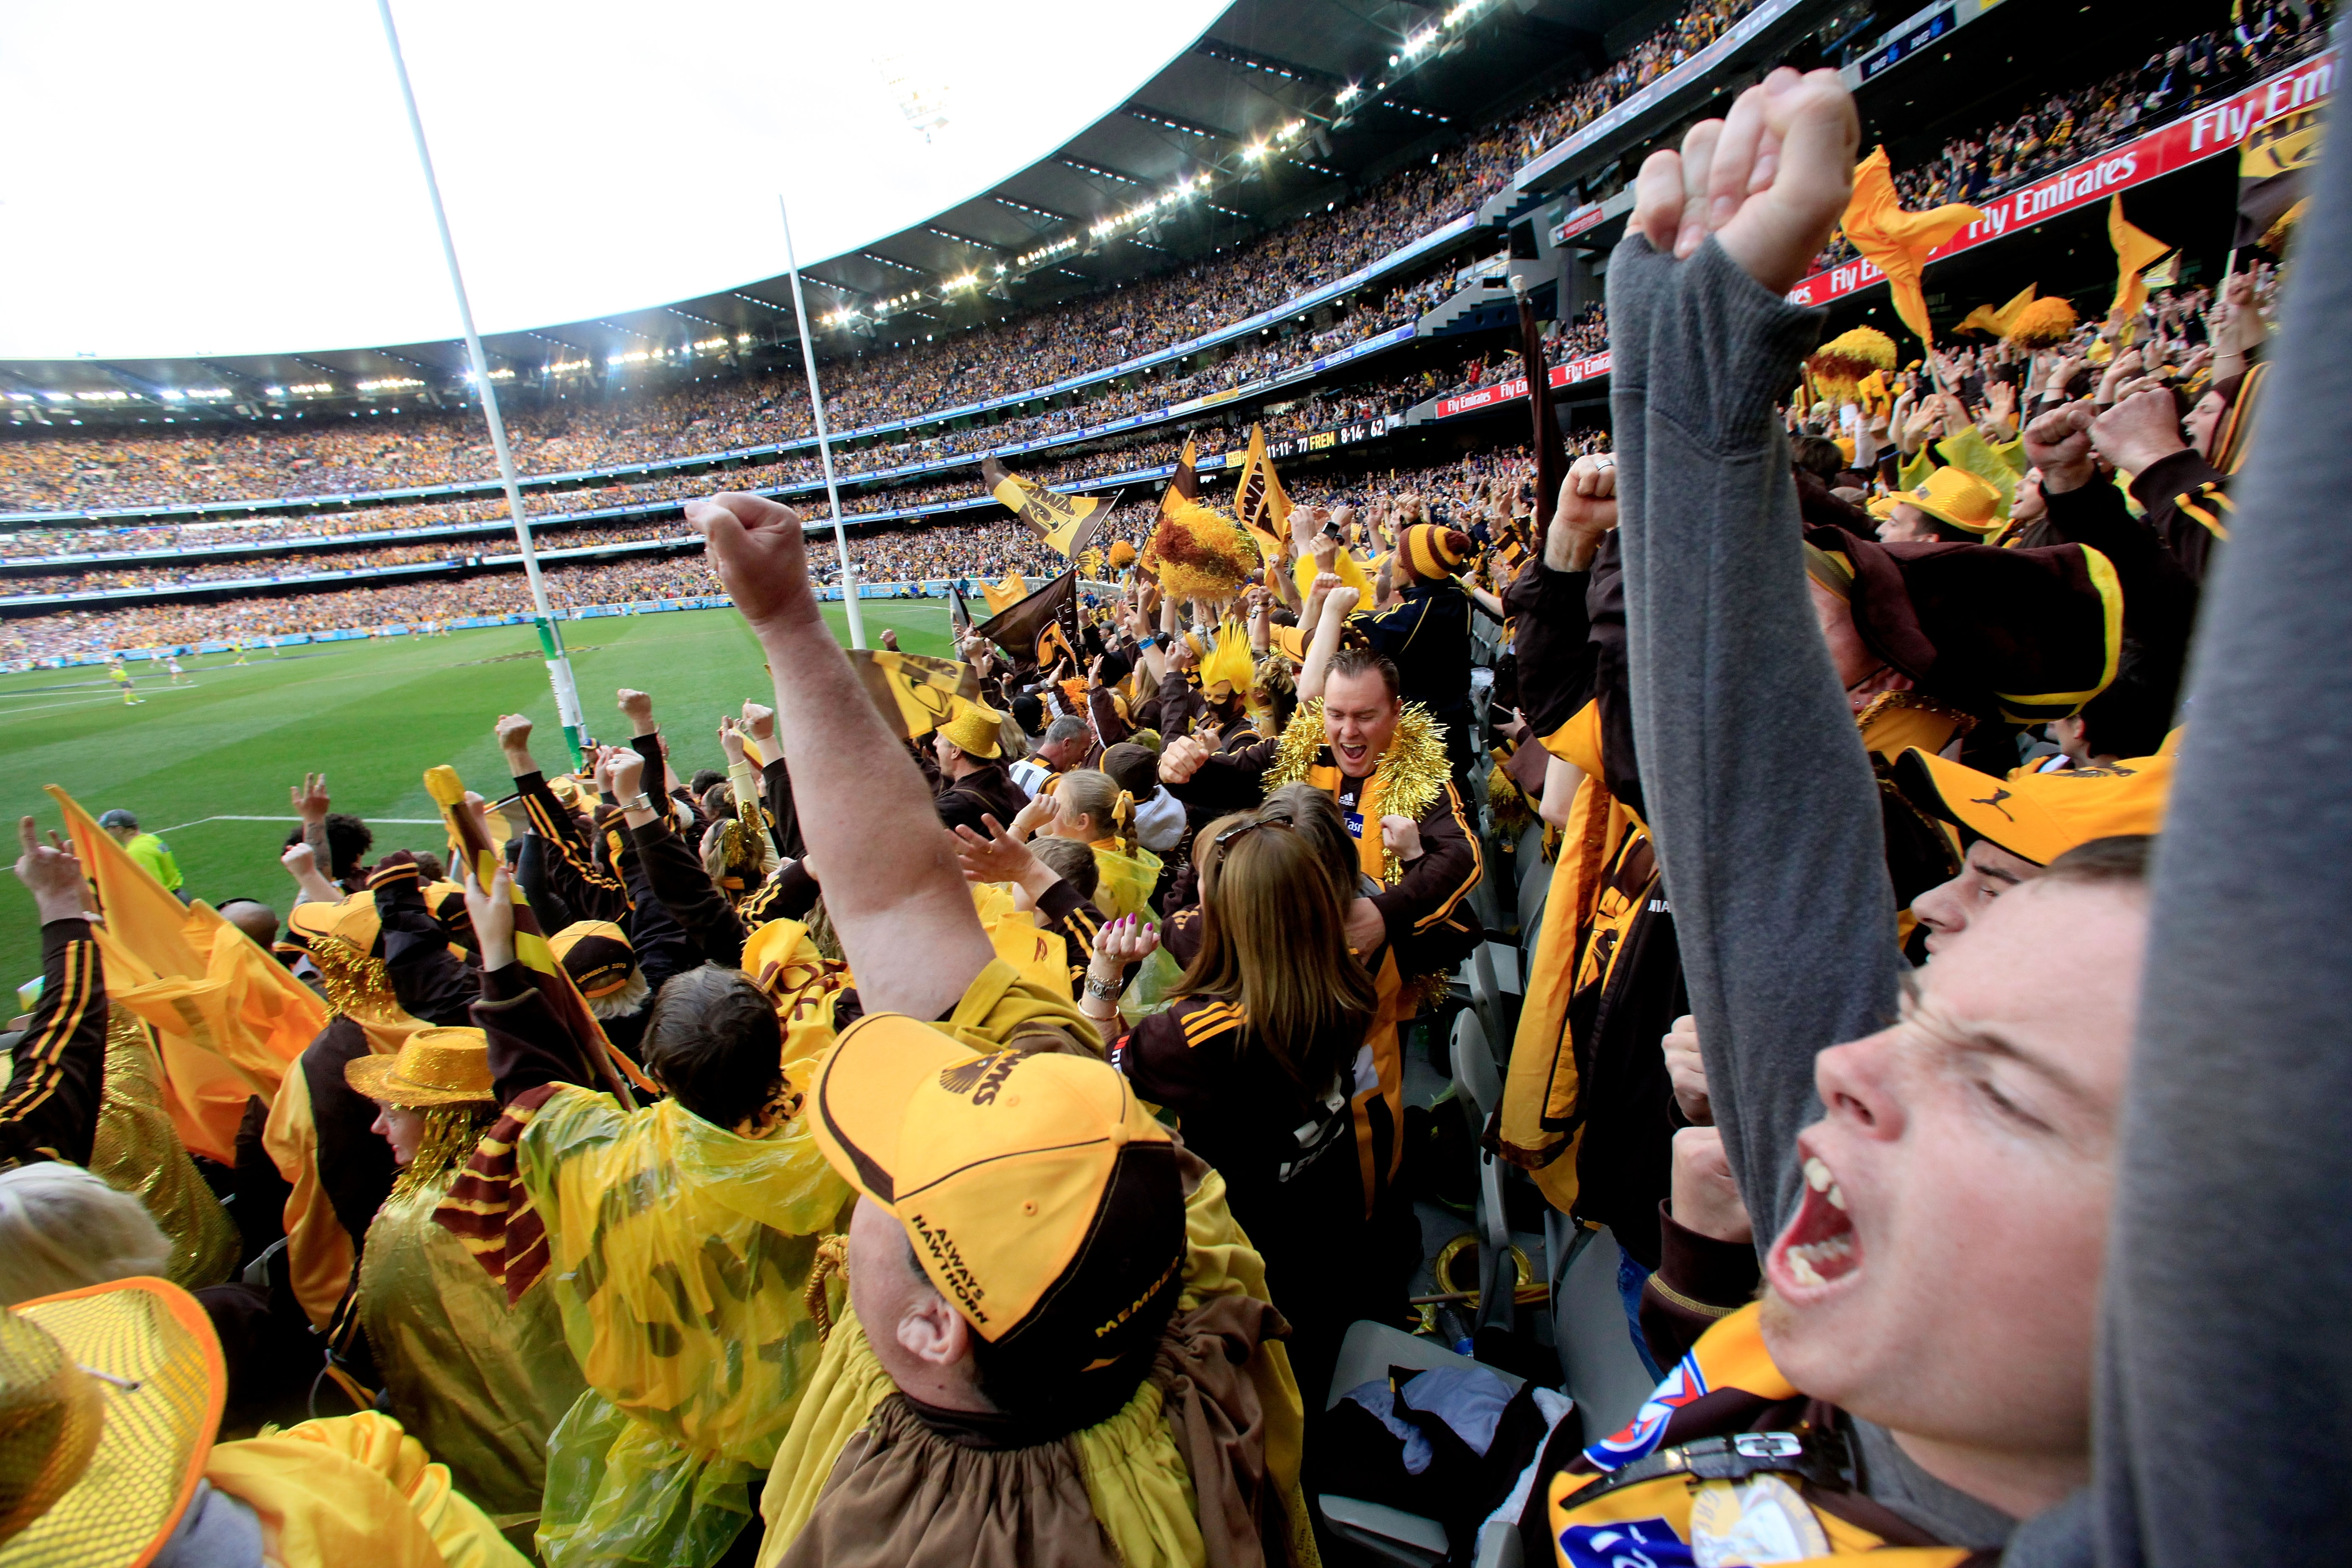 AFL crowds are world's fourthbiggest